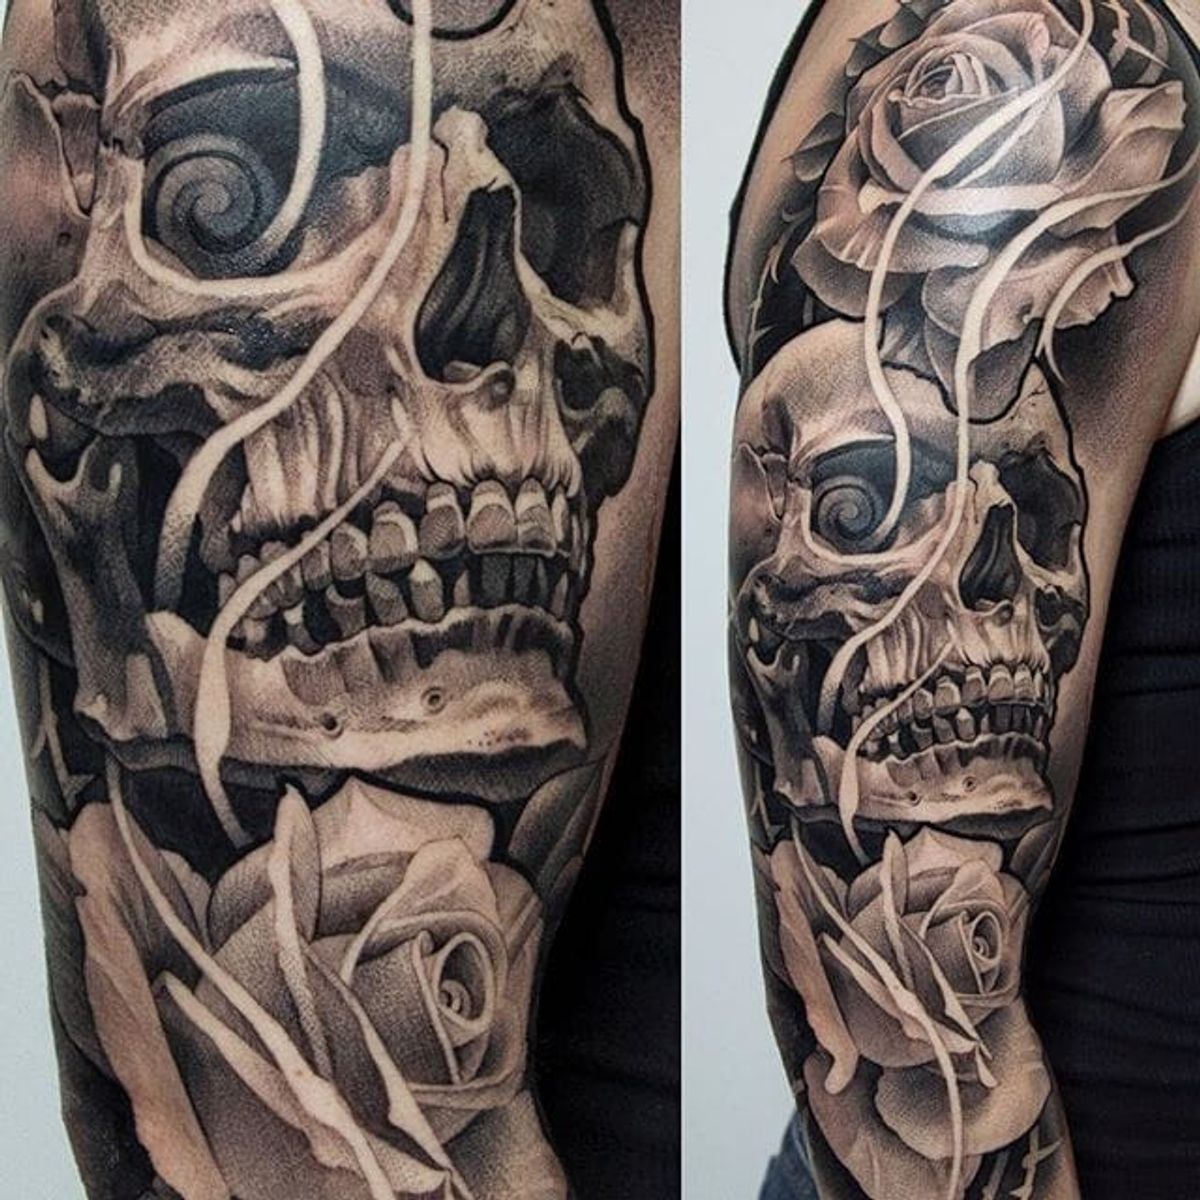 Tattoo uploaded by Ross Howerton • An intense skull surrounded by roses ...